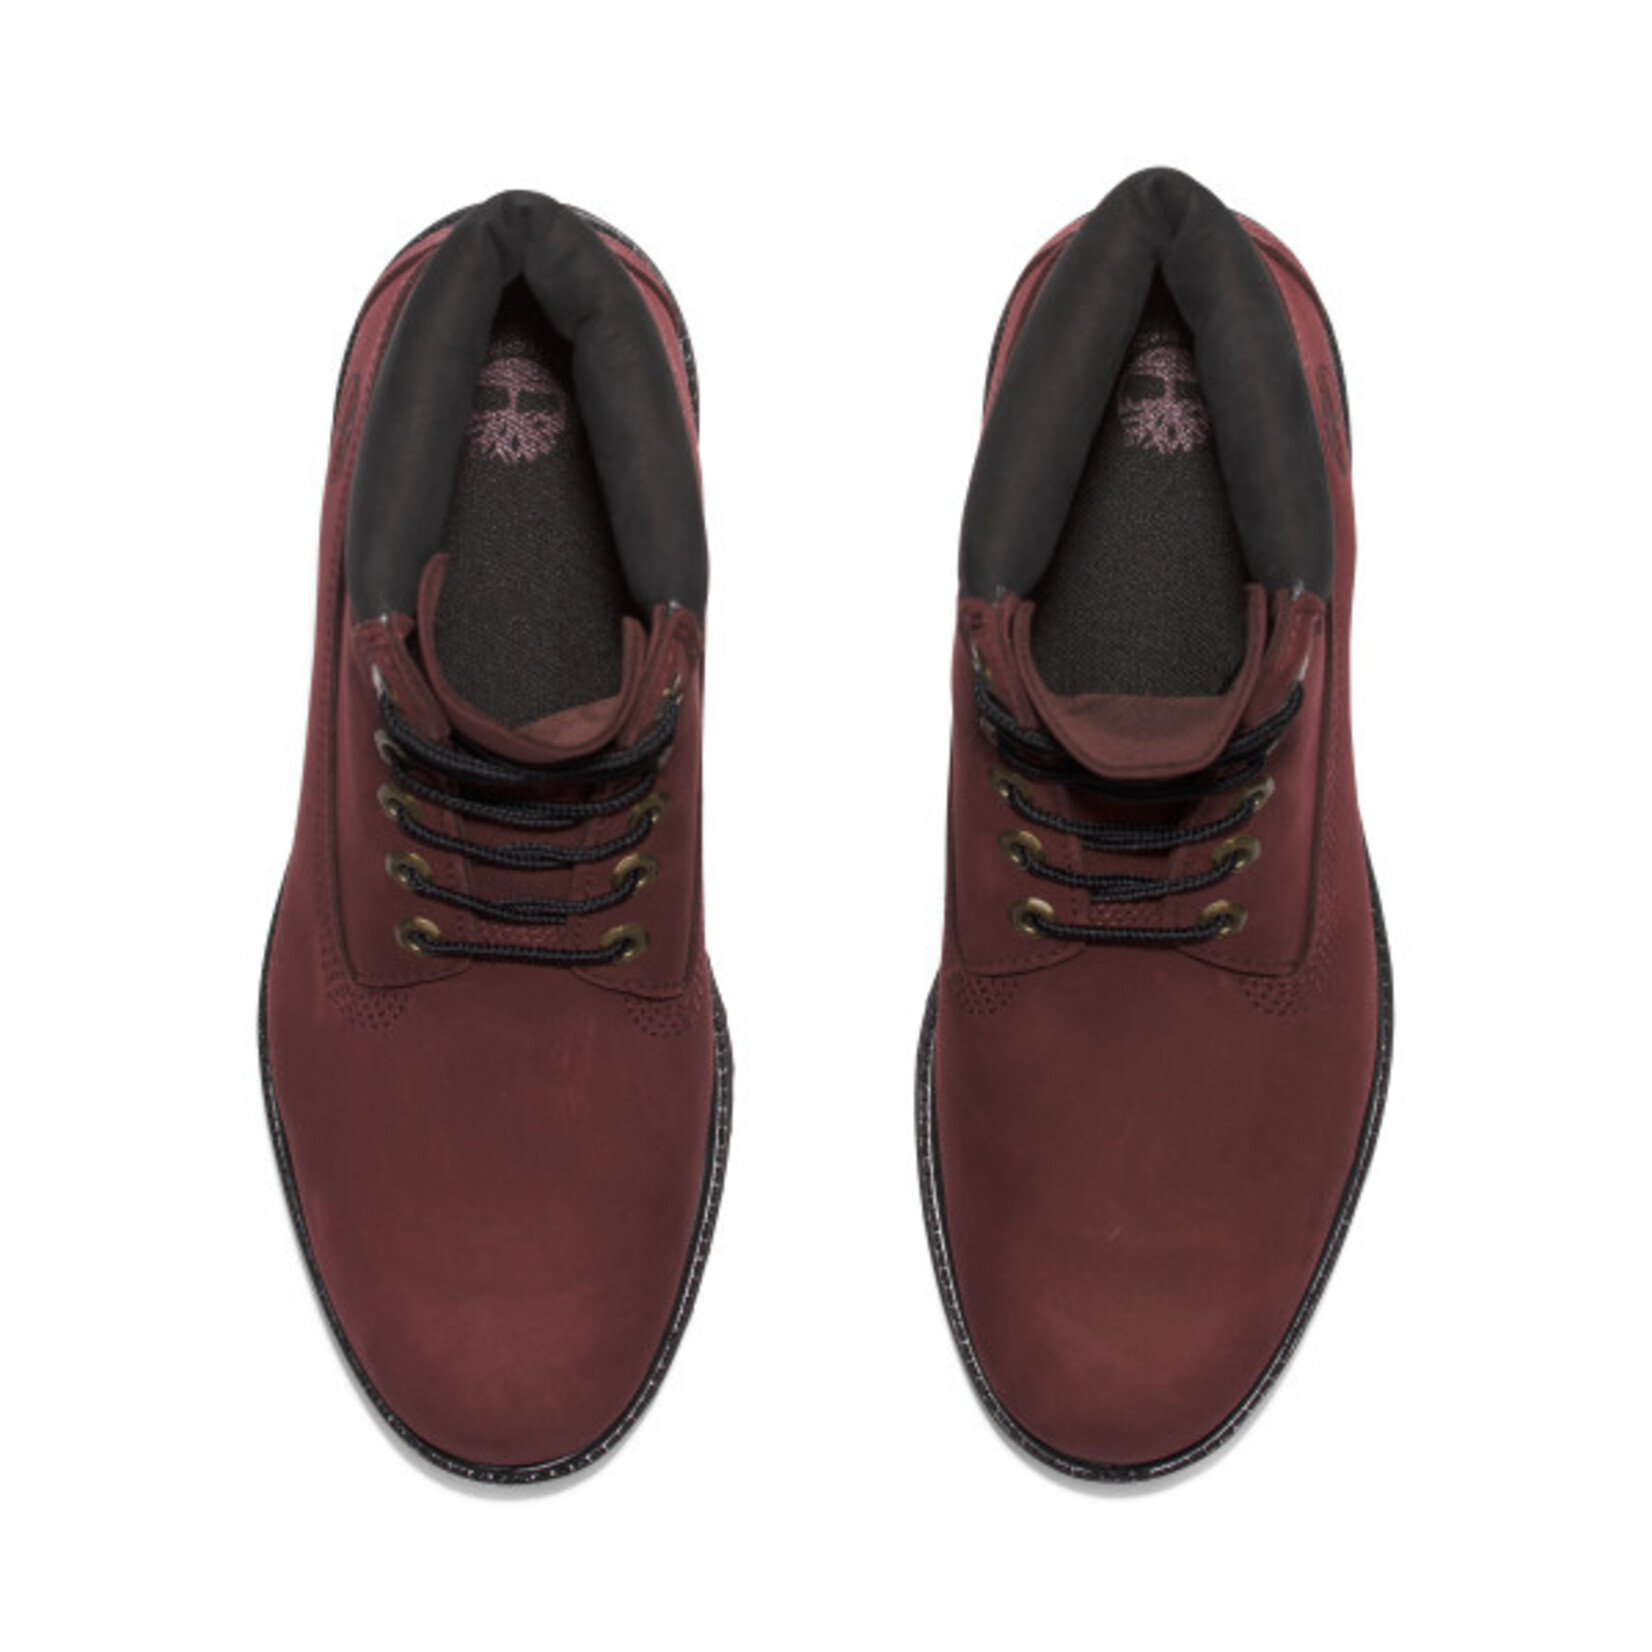 Timberland TIMBERLAND TB0A5VB5C60 Premium 6 IN BT WP Boot